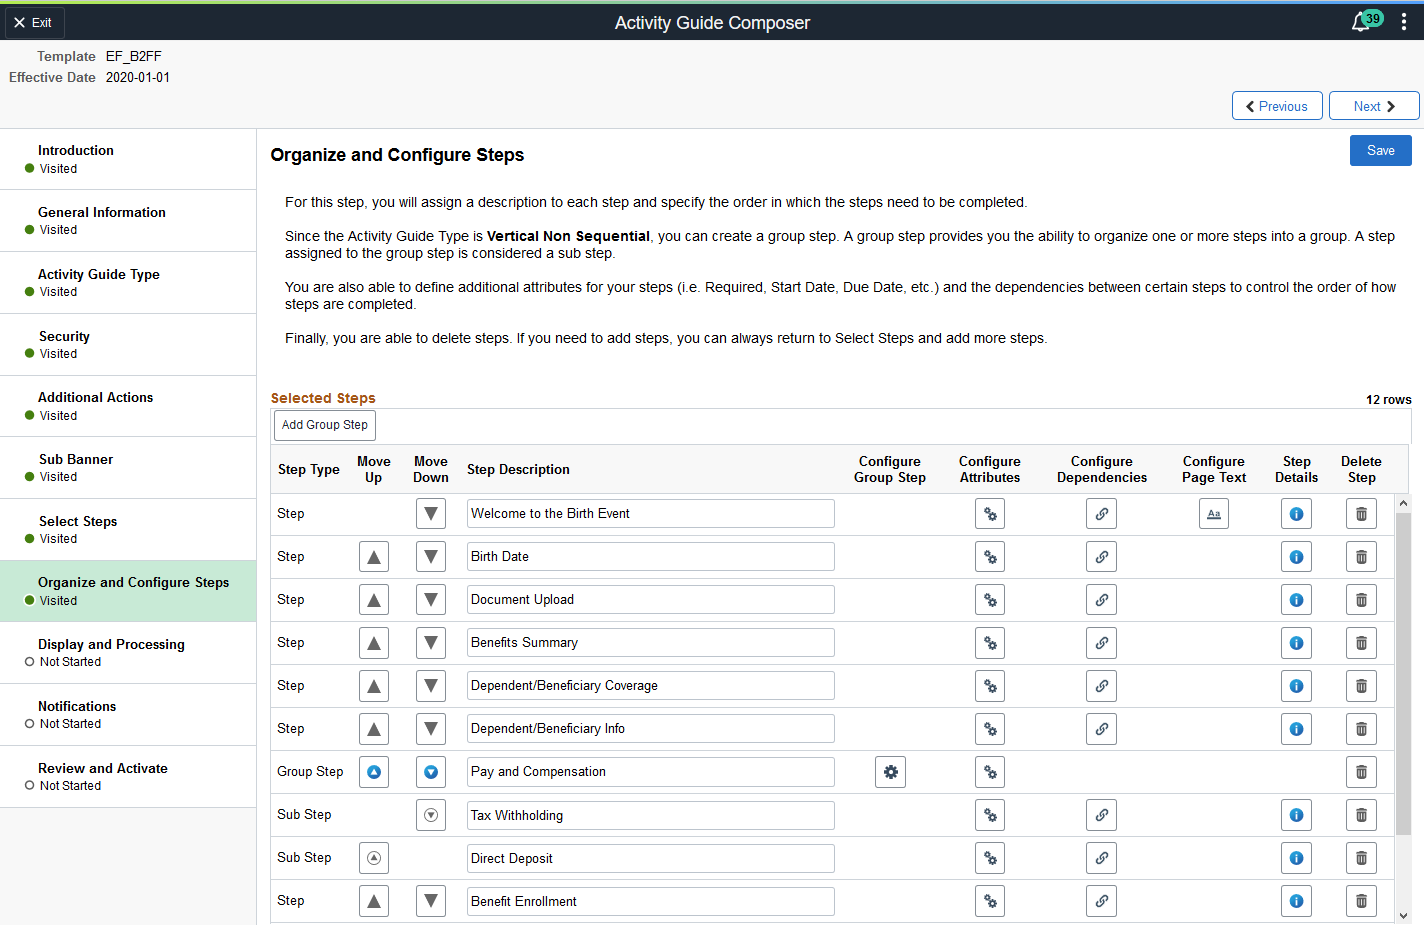 Activity Guide Composer - Organize and Configure Steps Page